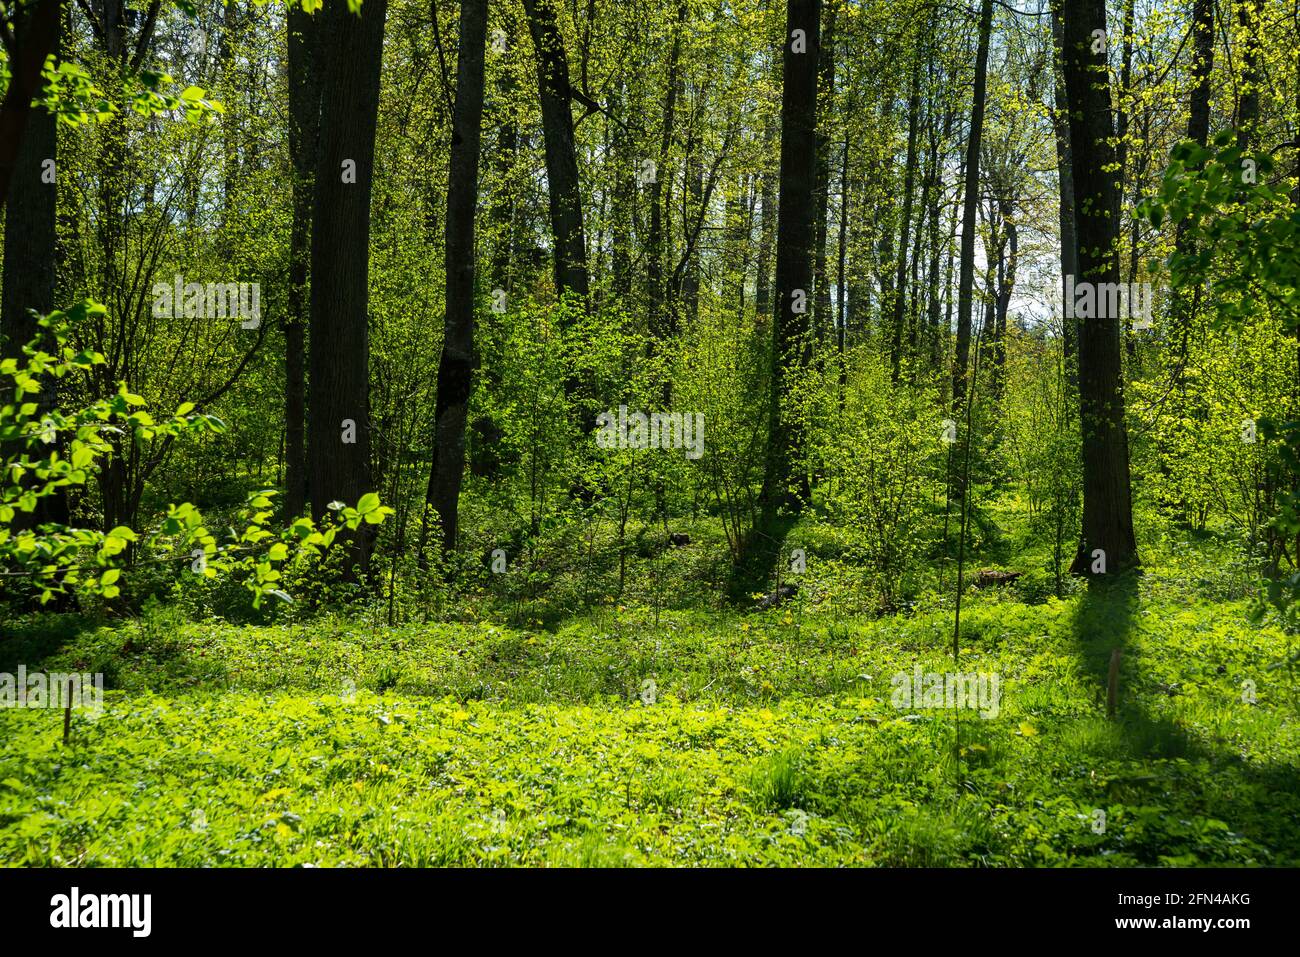 The green forest is sunlit in summer. Panorama showing the forest in spring with green tree leaves shining in the beautiful evening sun. Stock Photo